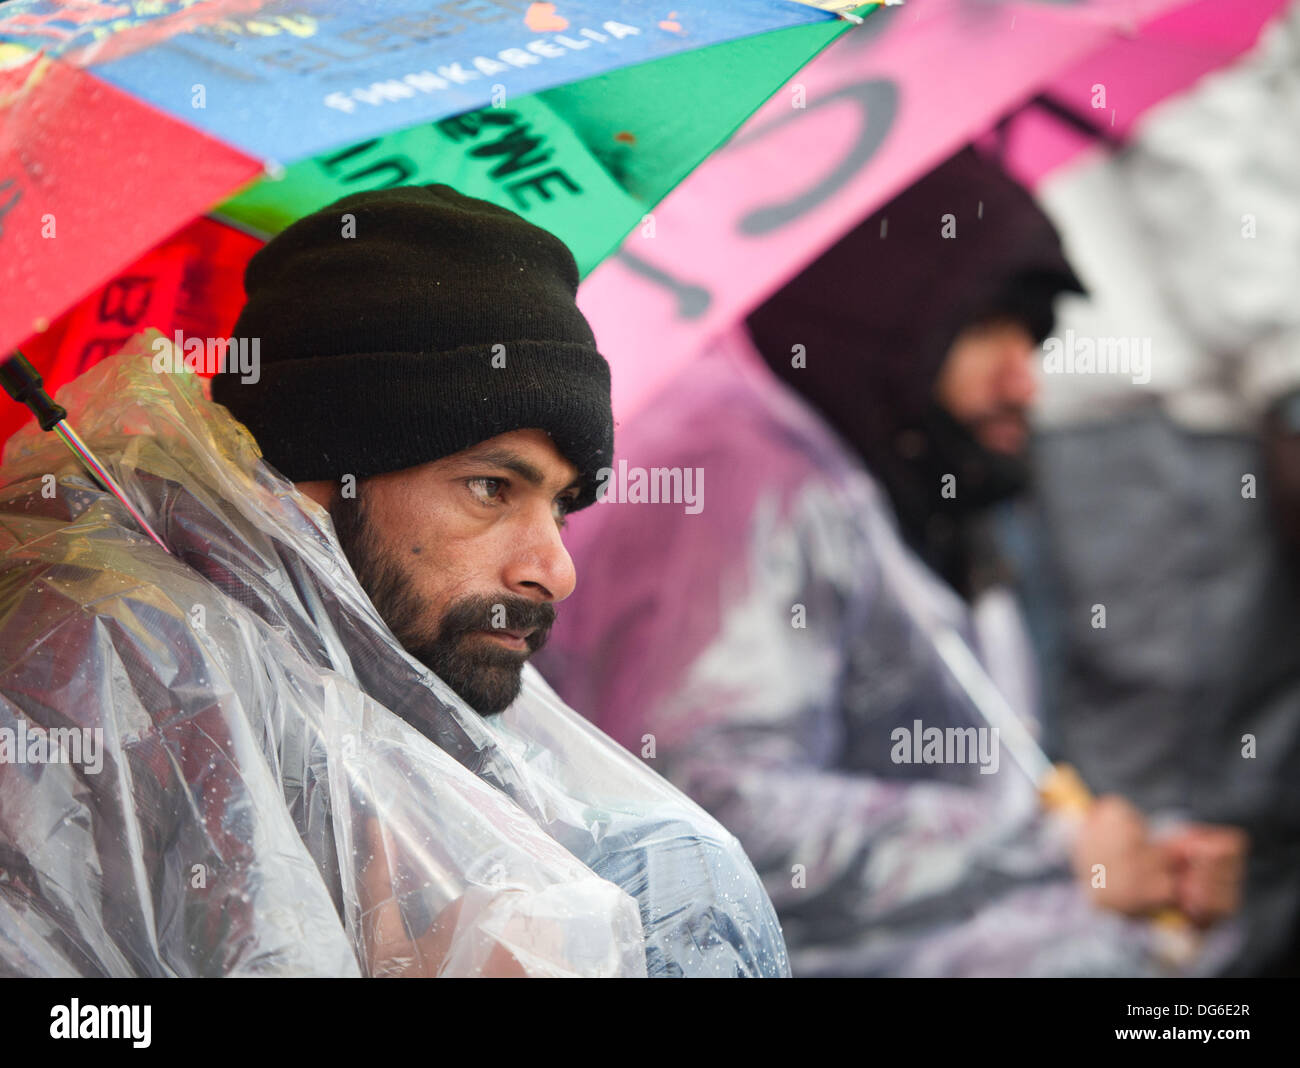 Berlin, Germany. 15th Oct, 2013. Refugee sit under umbrellas on Pariser Platz in Berlin, Germany, 15 October 2013. Three refugees had to be taken to hospital because of their poor state of health. The refugees have been on hunger strike since 09 October 2013. Photo: OLE SPATA/dpa/Alamy Live News Stock Photo